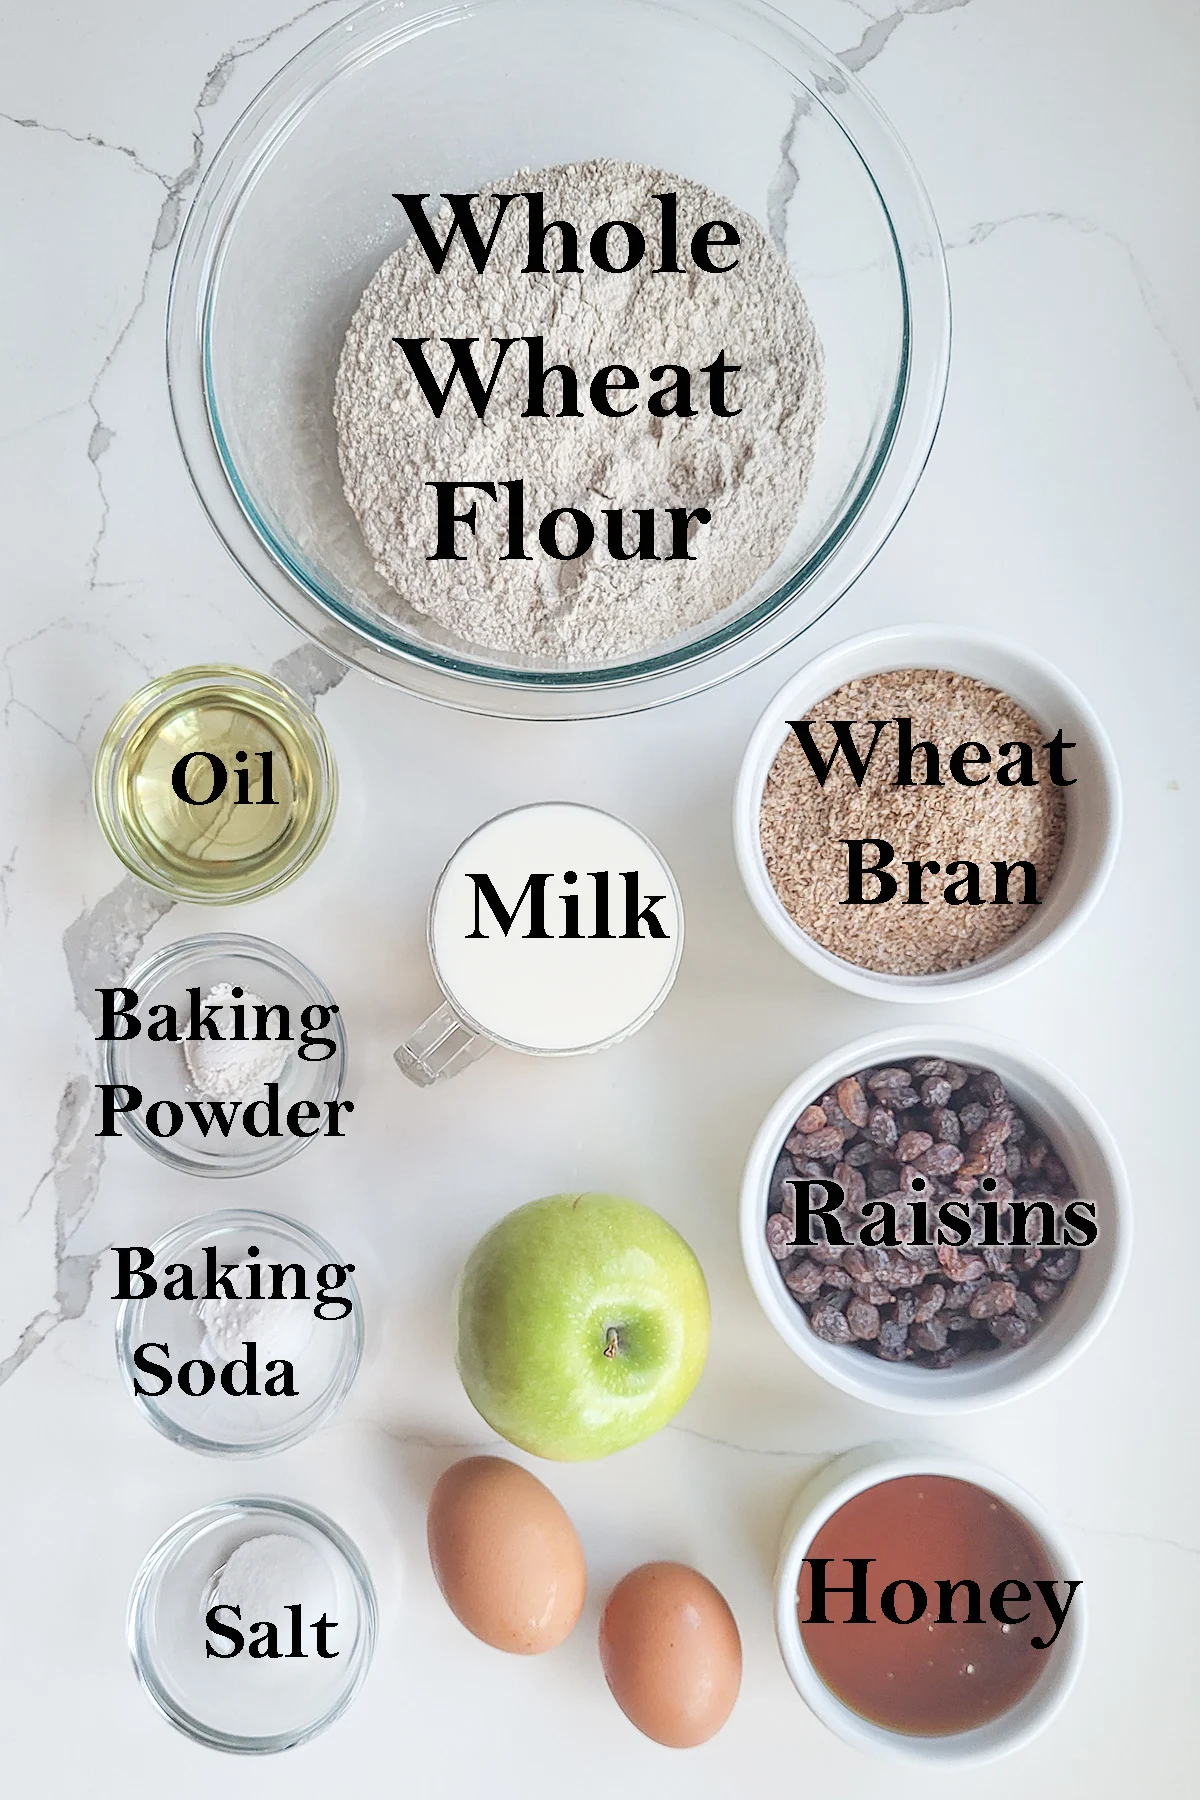 Ingredients for bran muffins with text overlay.